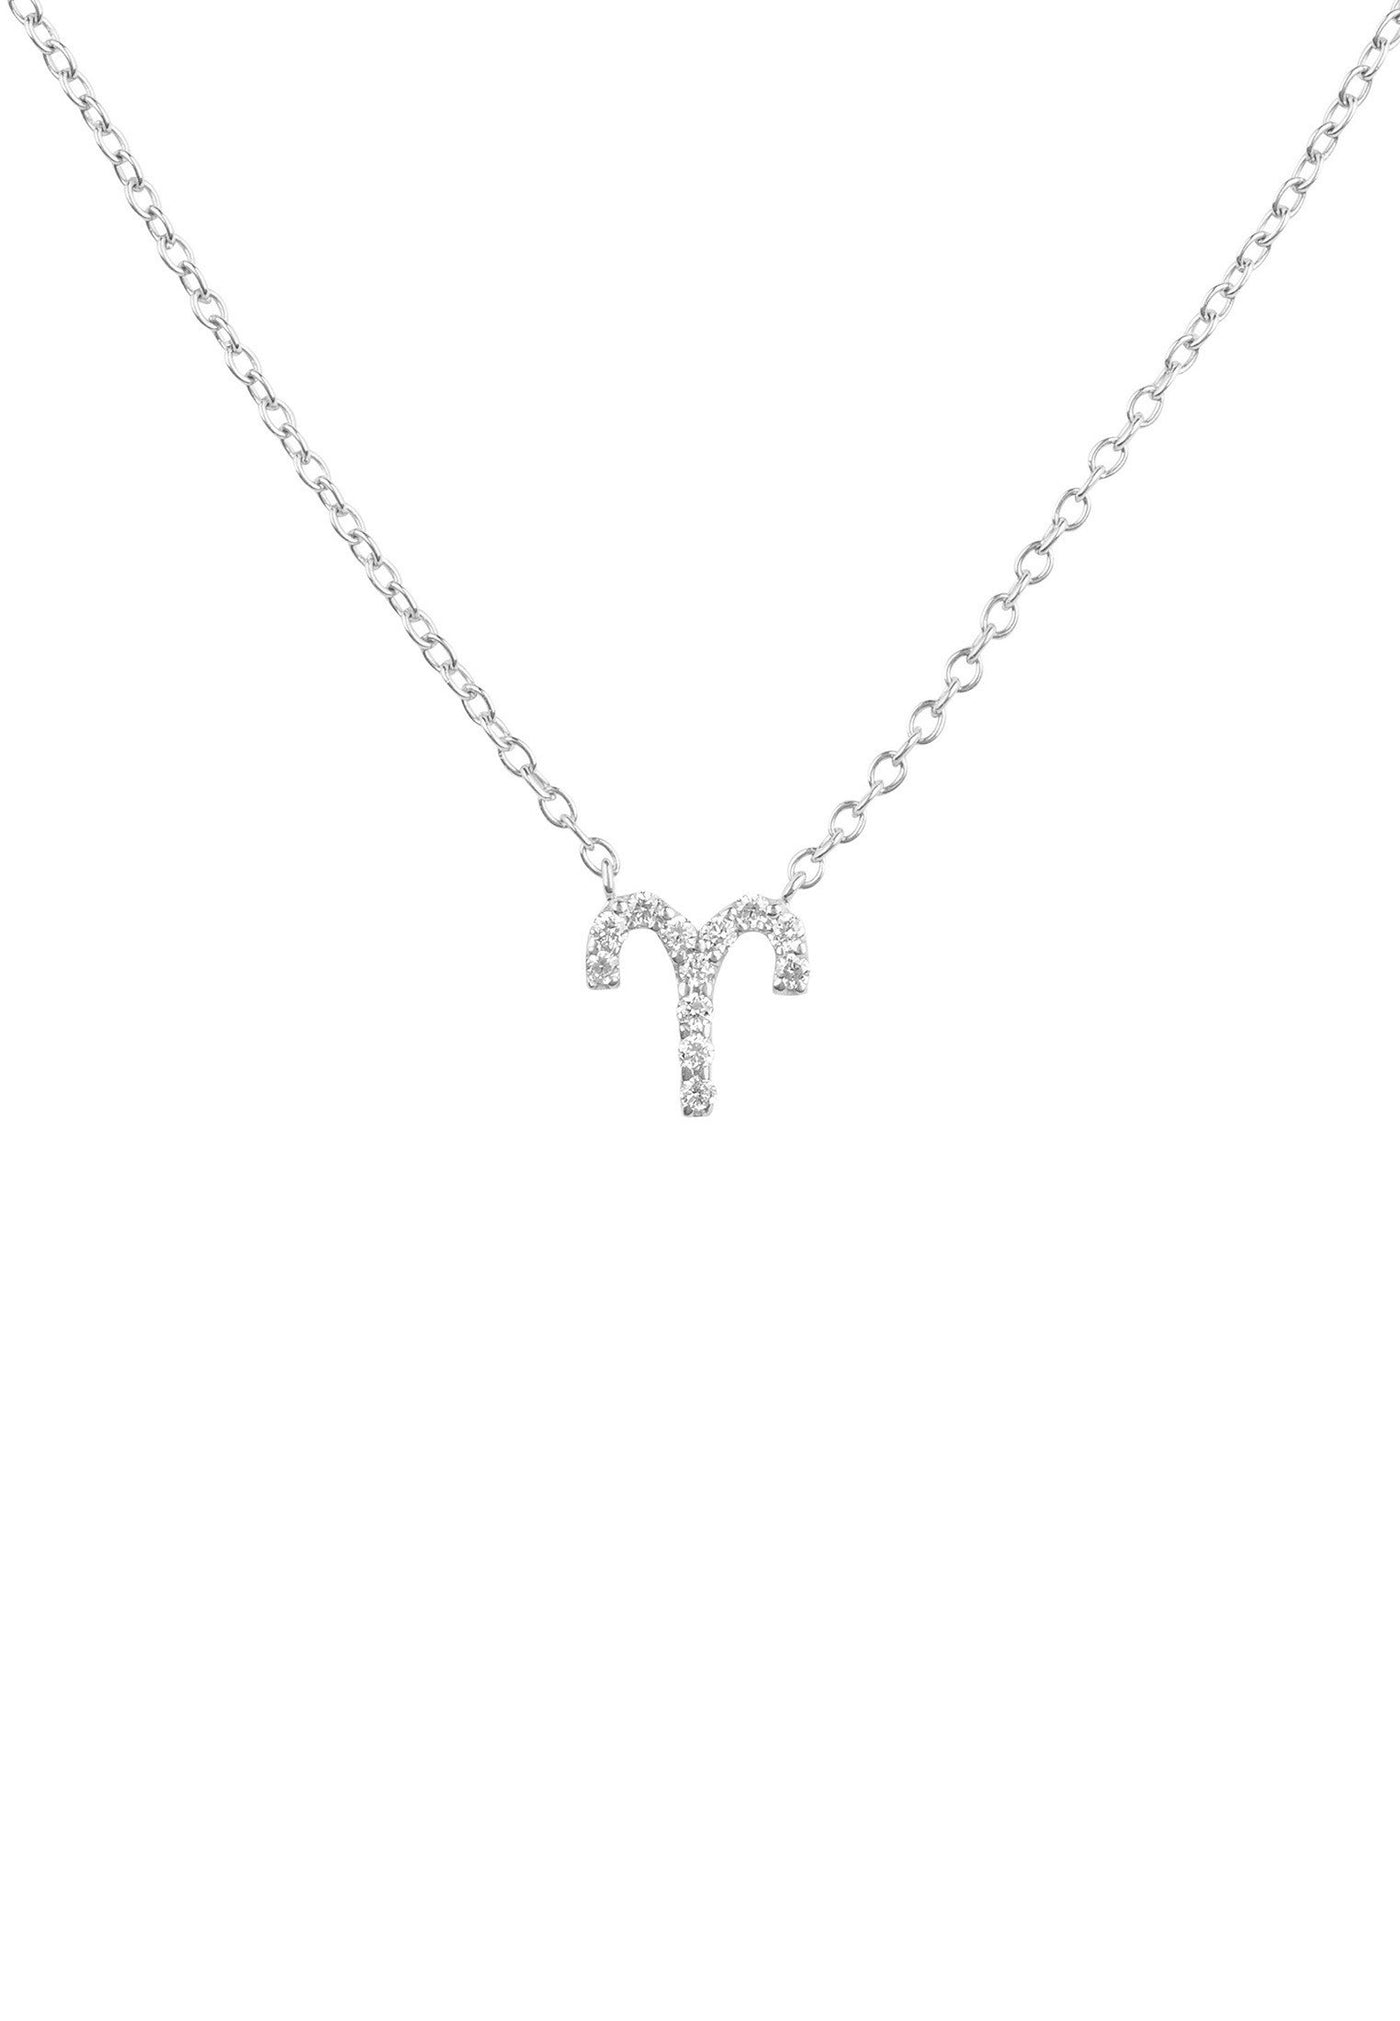 Aries - Necklace - 925 Sterling Silver - Diamonds